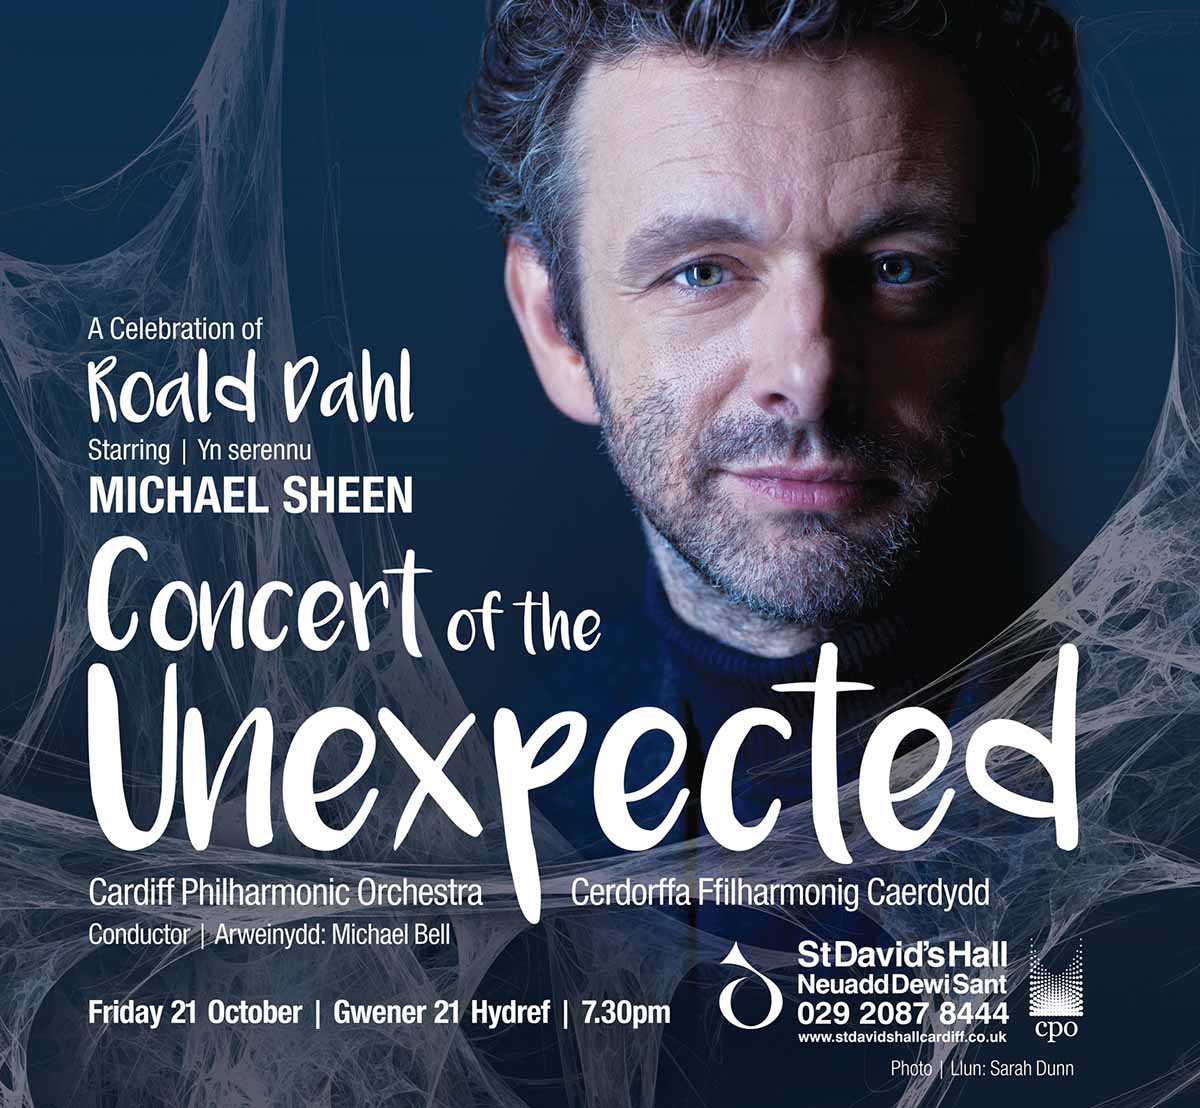 Concert of the Unexpected